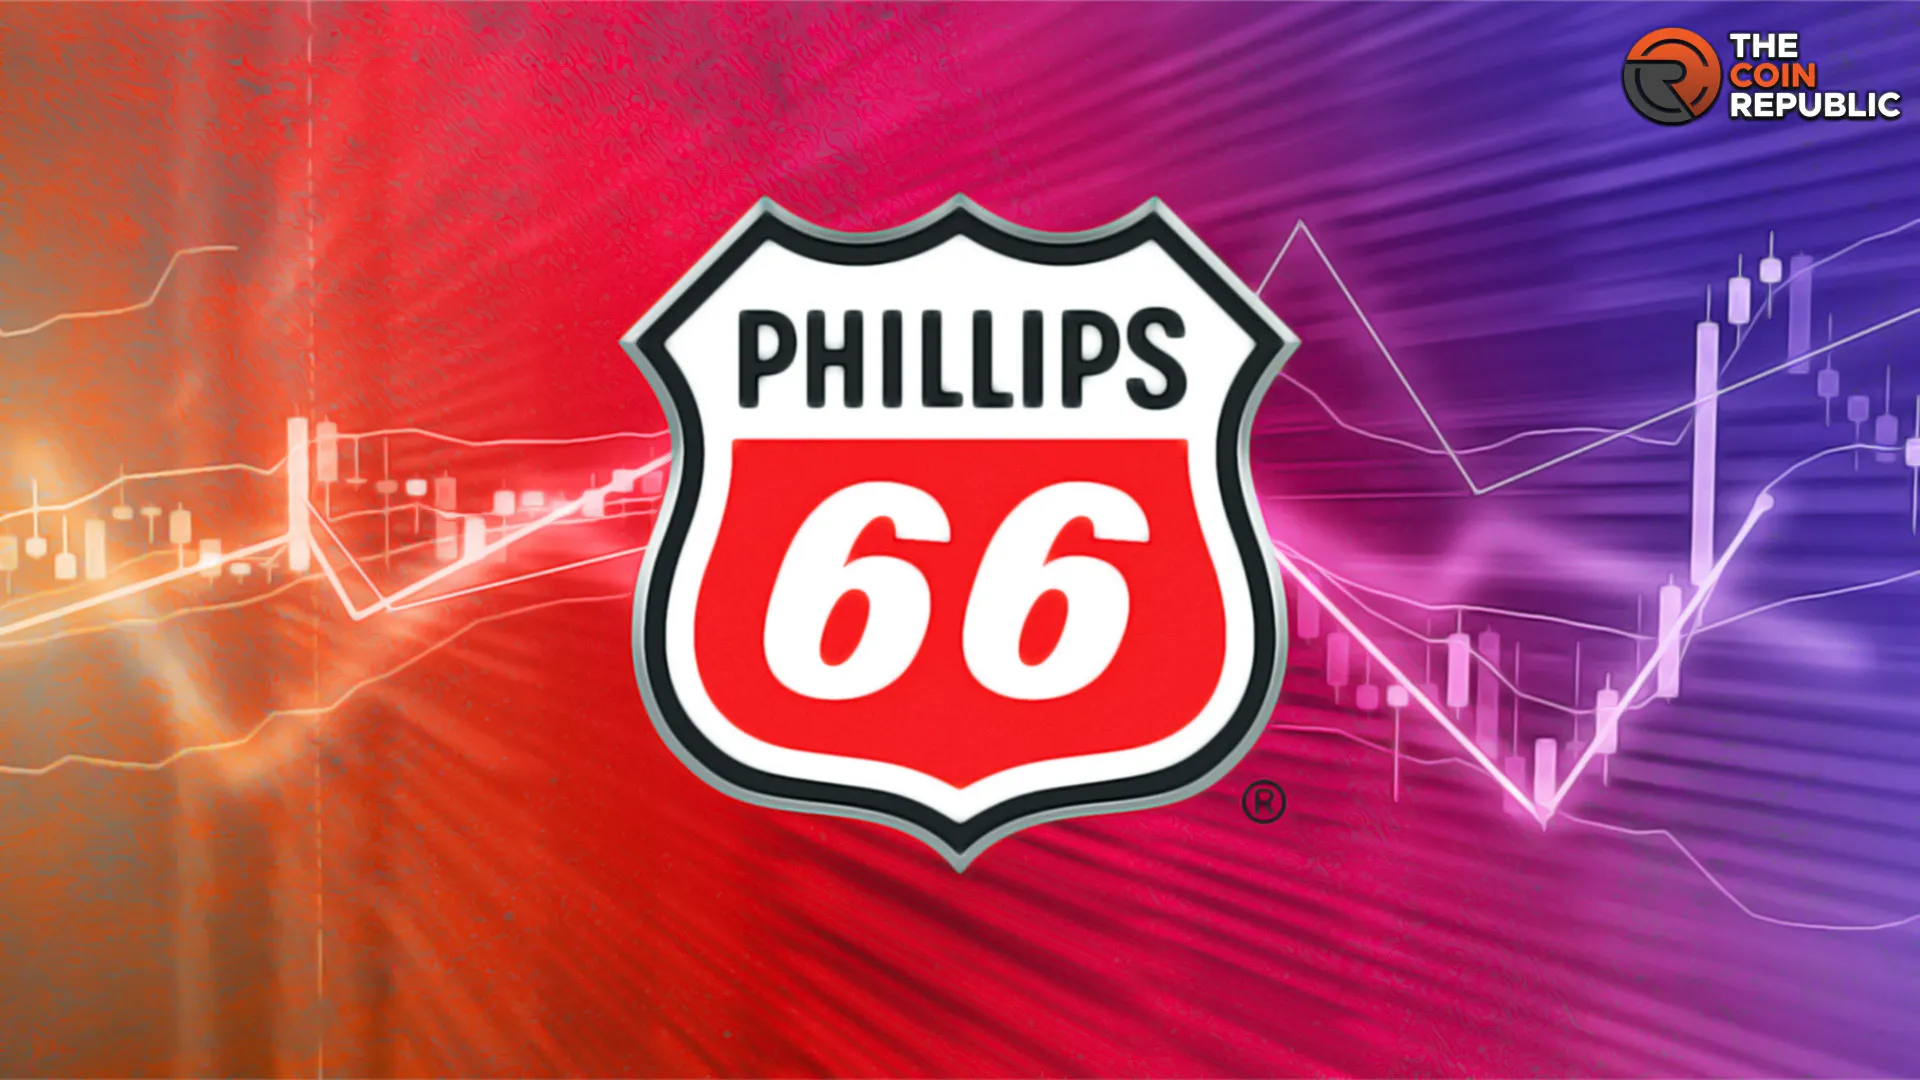 Phillips 66 Stock Price Prediction: What Next In PSX?